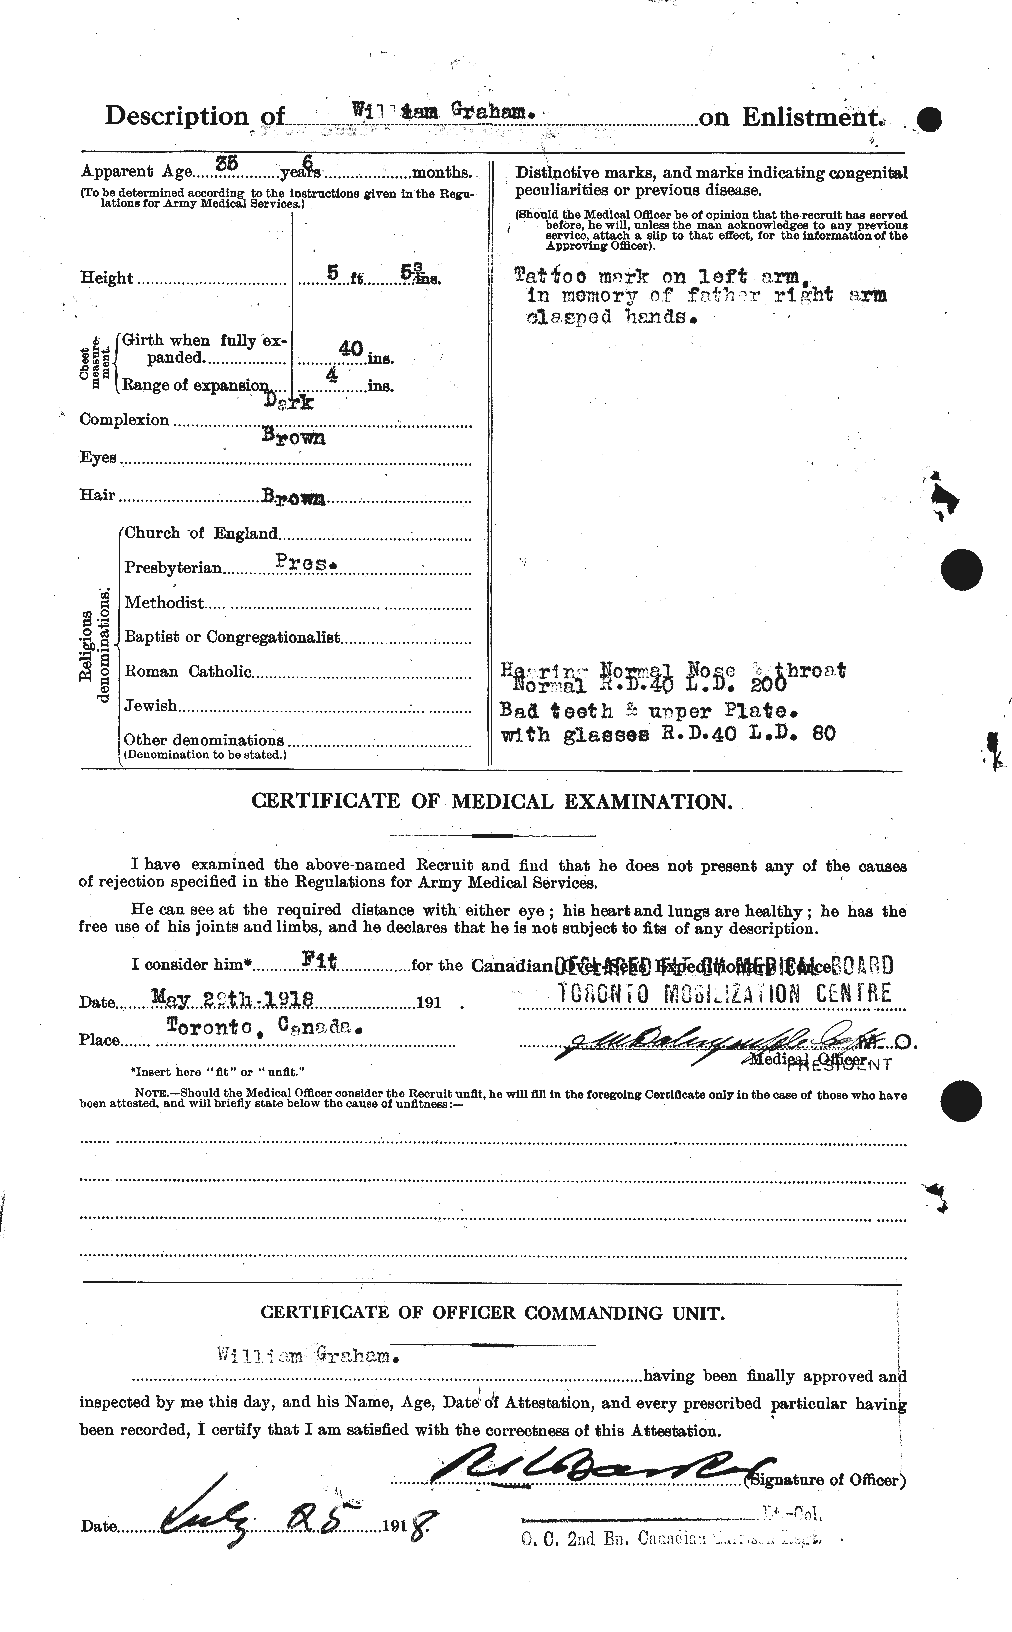 Personnel Records of the First World War - CEF 362699b